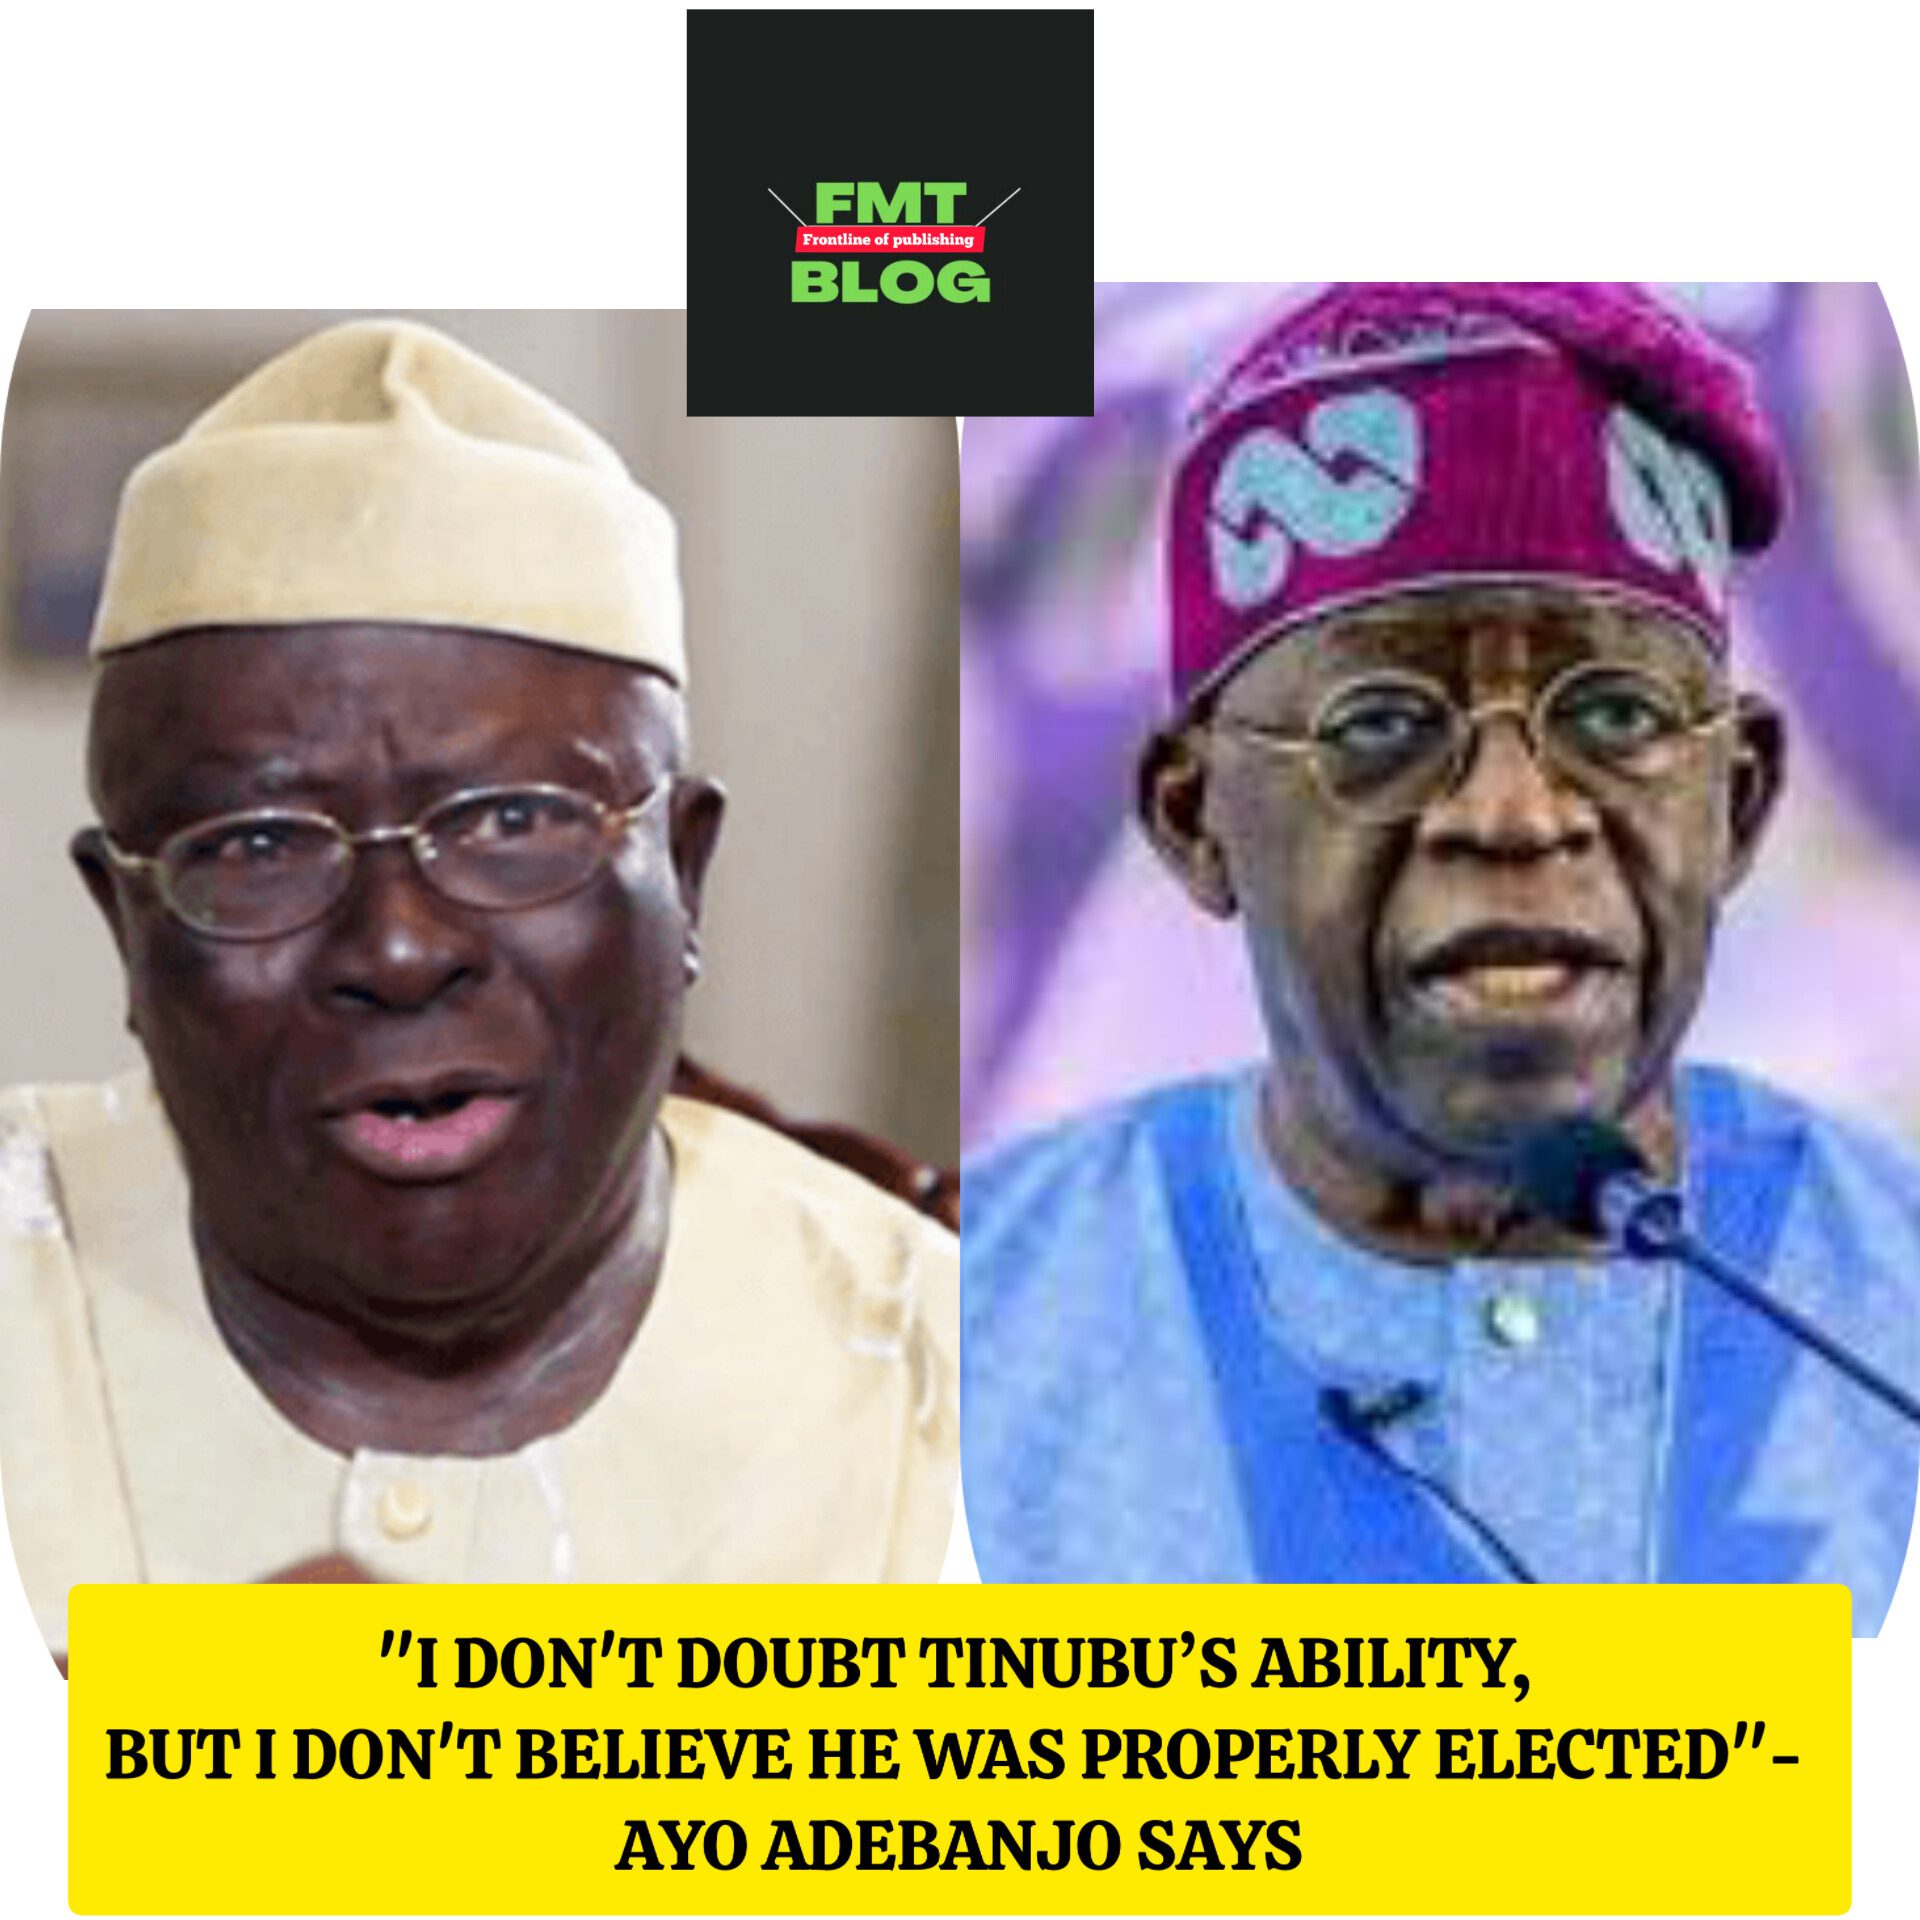 ”I don’t doubt Tinubu’s ability, but I don’t believe he was properly elected”- Ayo Adebanjo